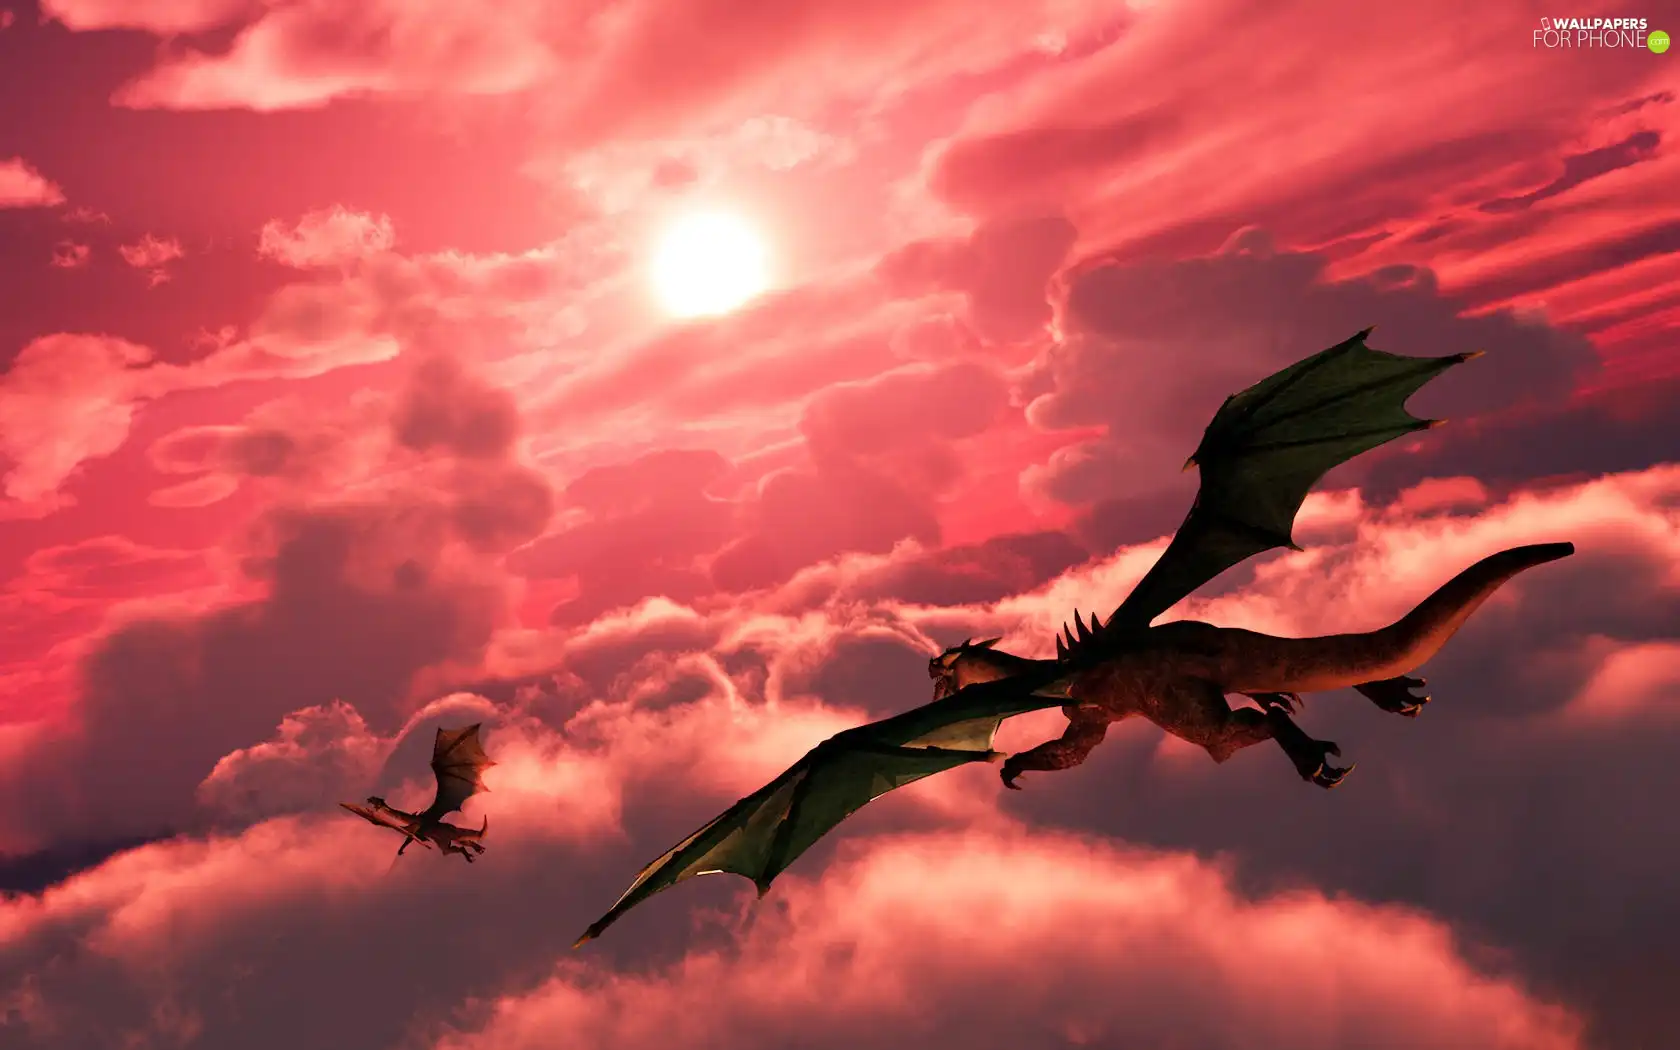 Dragons, clouds